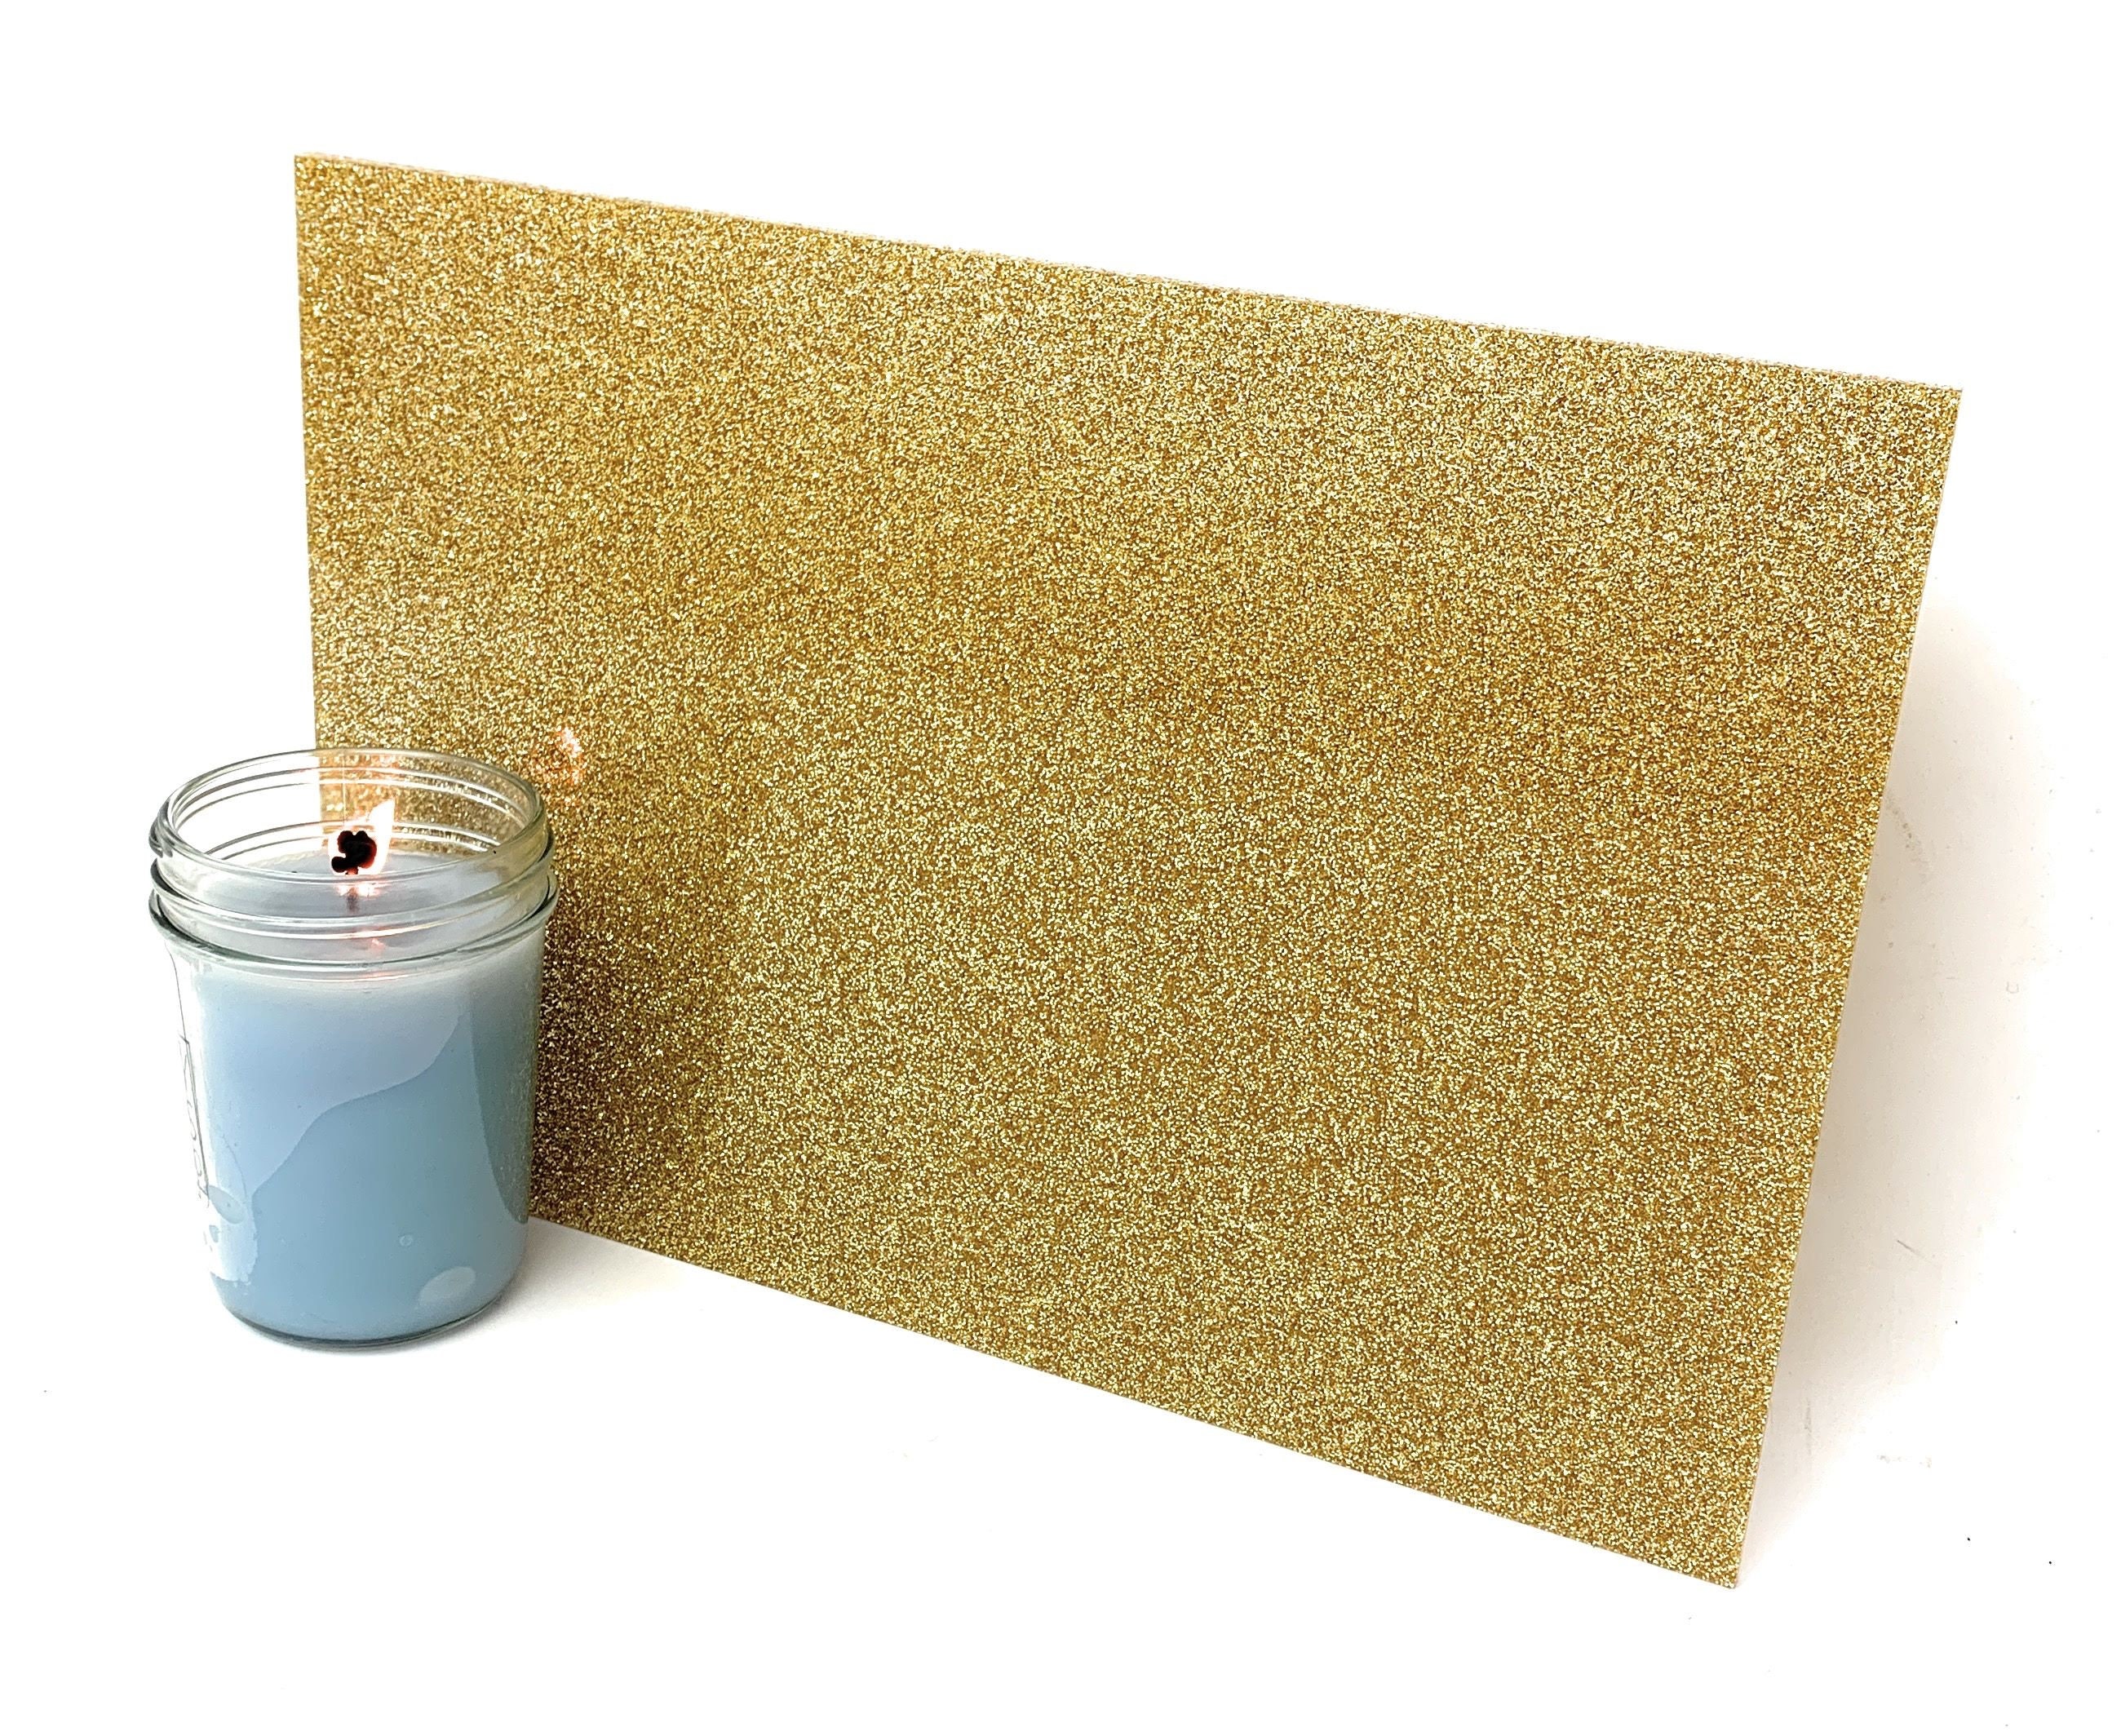 Delightful Details Gold Glitter Acrylic Sheet, SET OF 3, Glowforge Laser  Safe Sheet Cast Acrylic, 12inx20in 1/8in or 3mm 